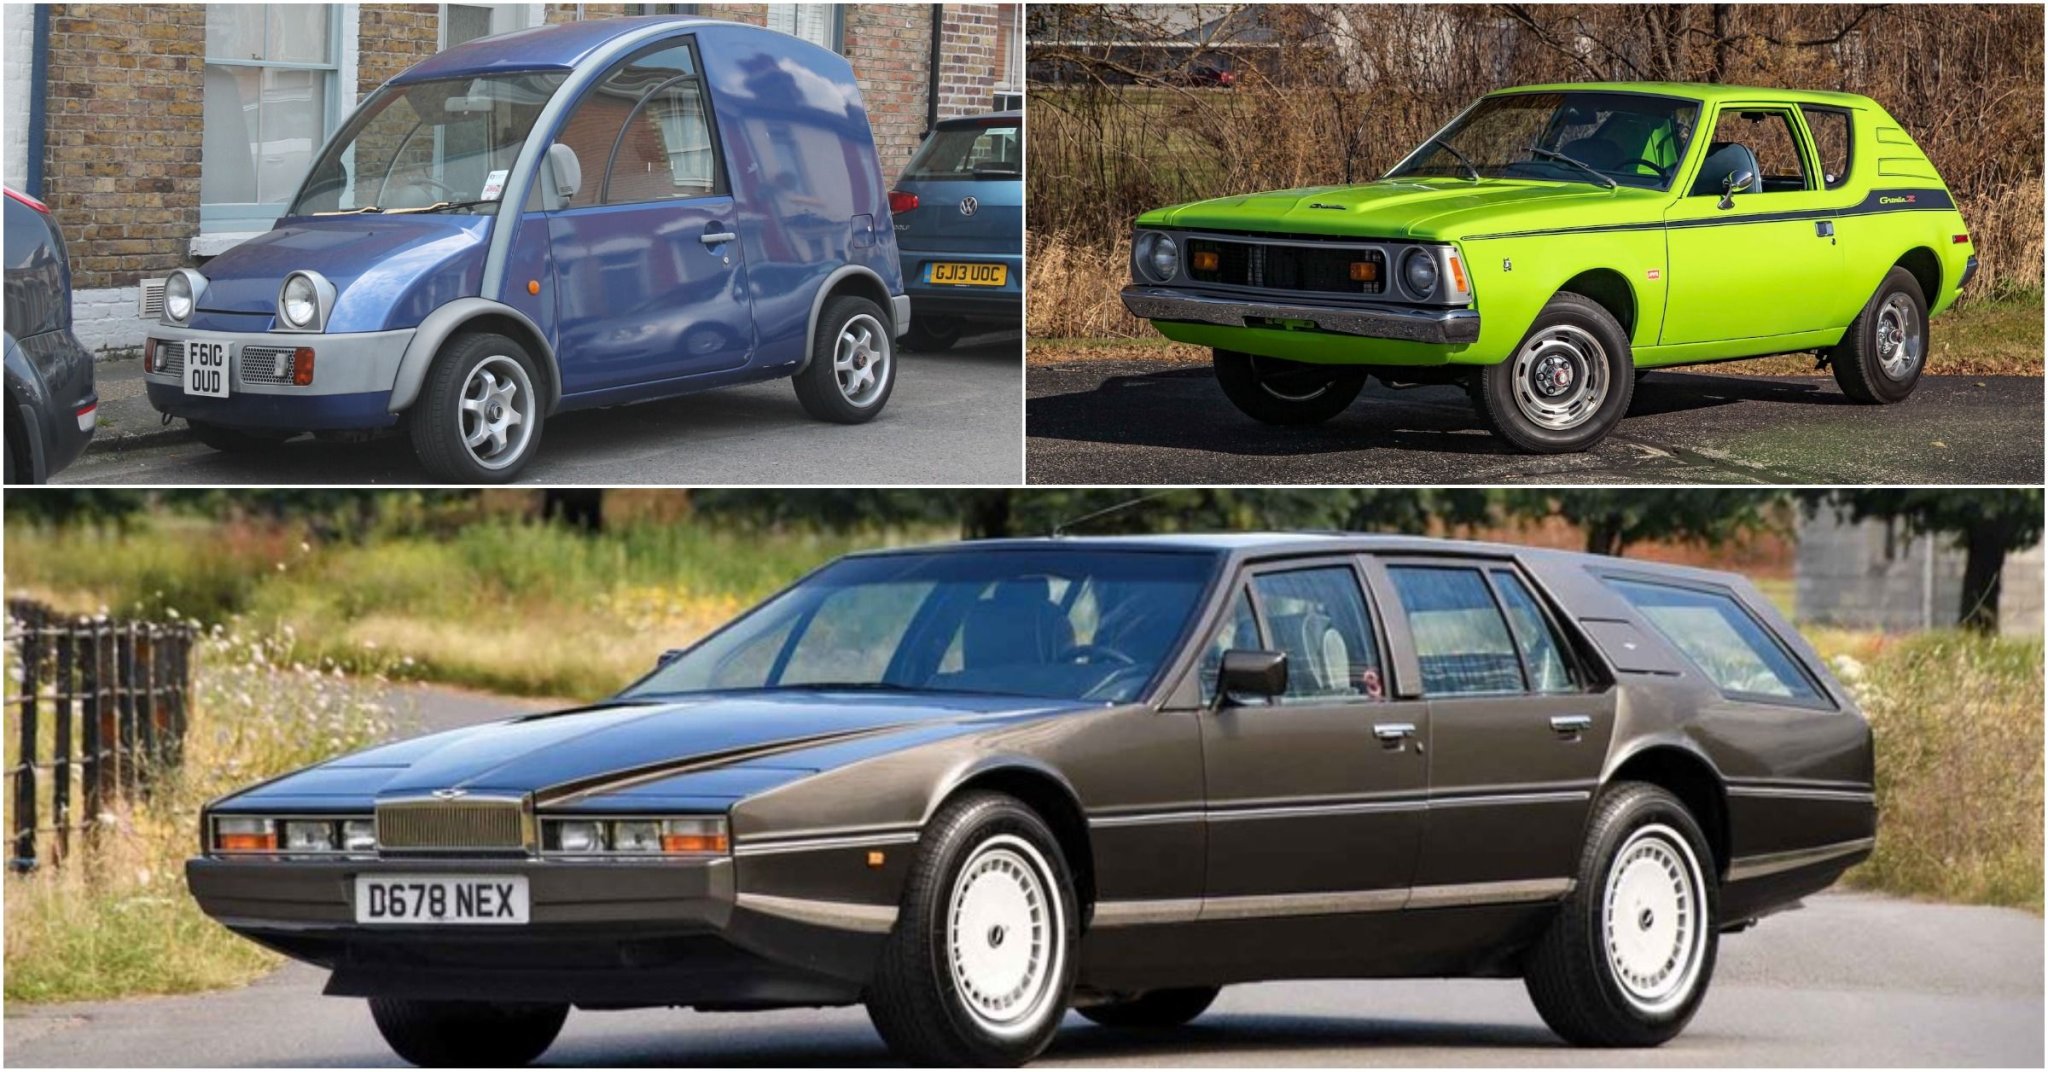 14 Ugliest Cars of the '80s (1 That's Pretty Sick)